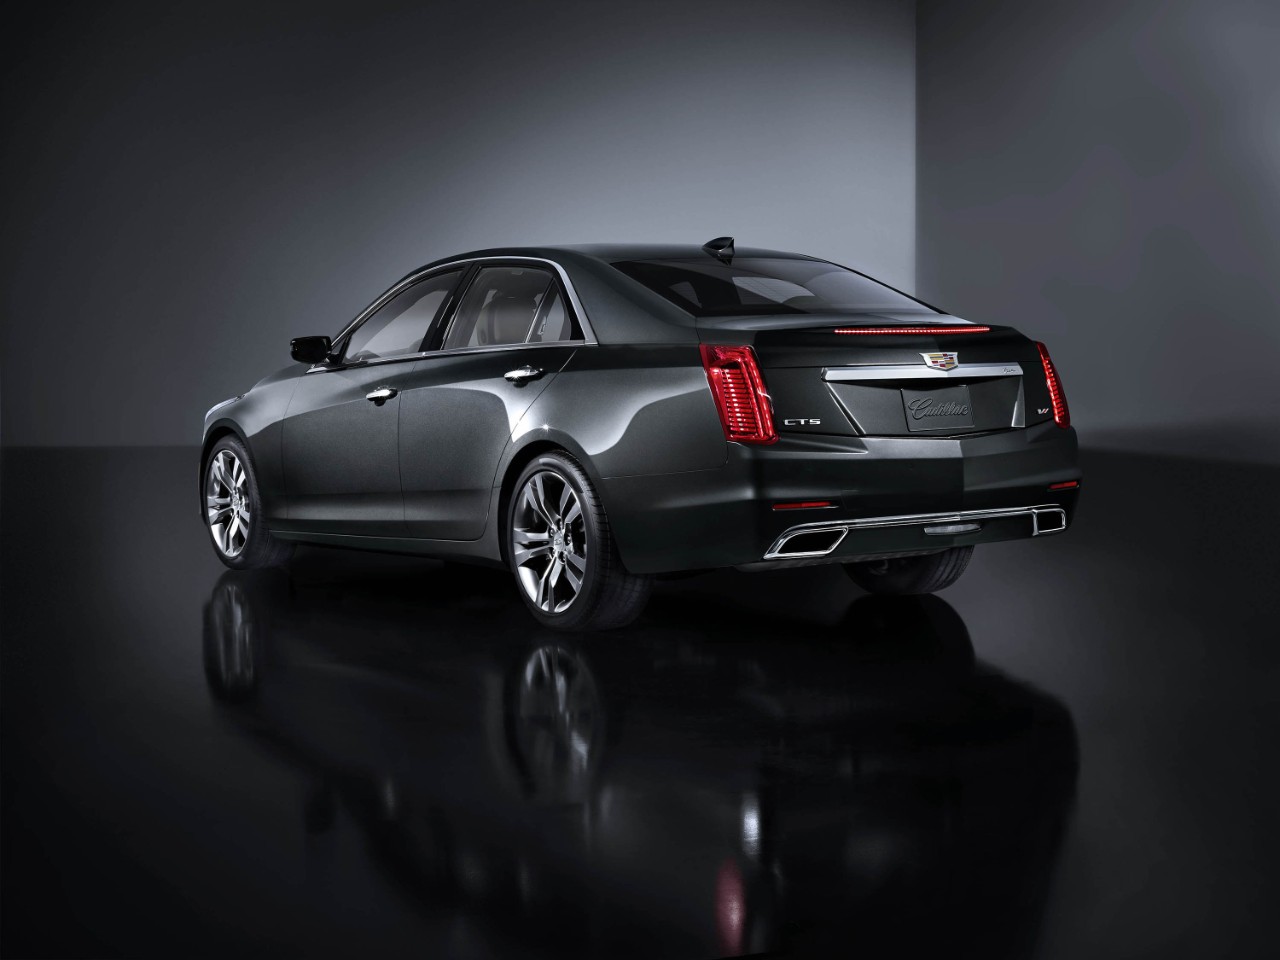 Updated 2015 Cadillac Cts Finally Breaks Cover Autoevolution